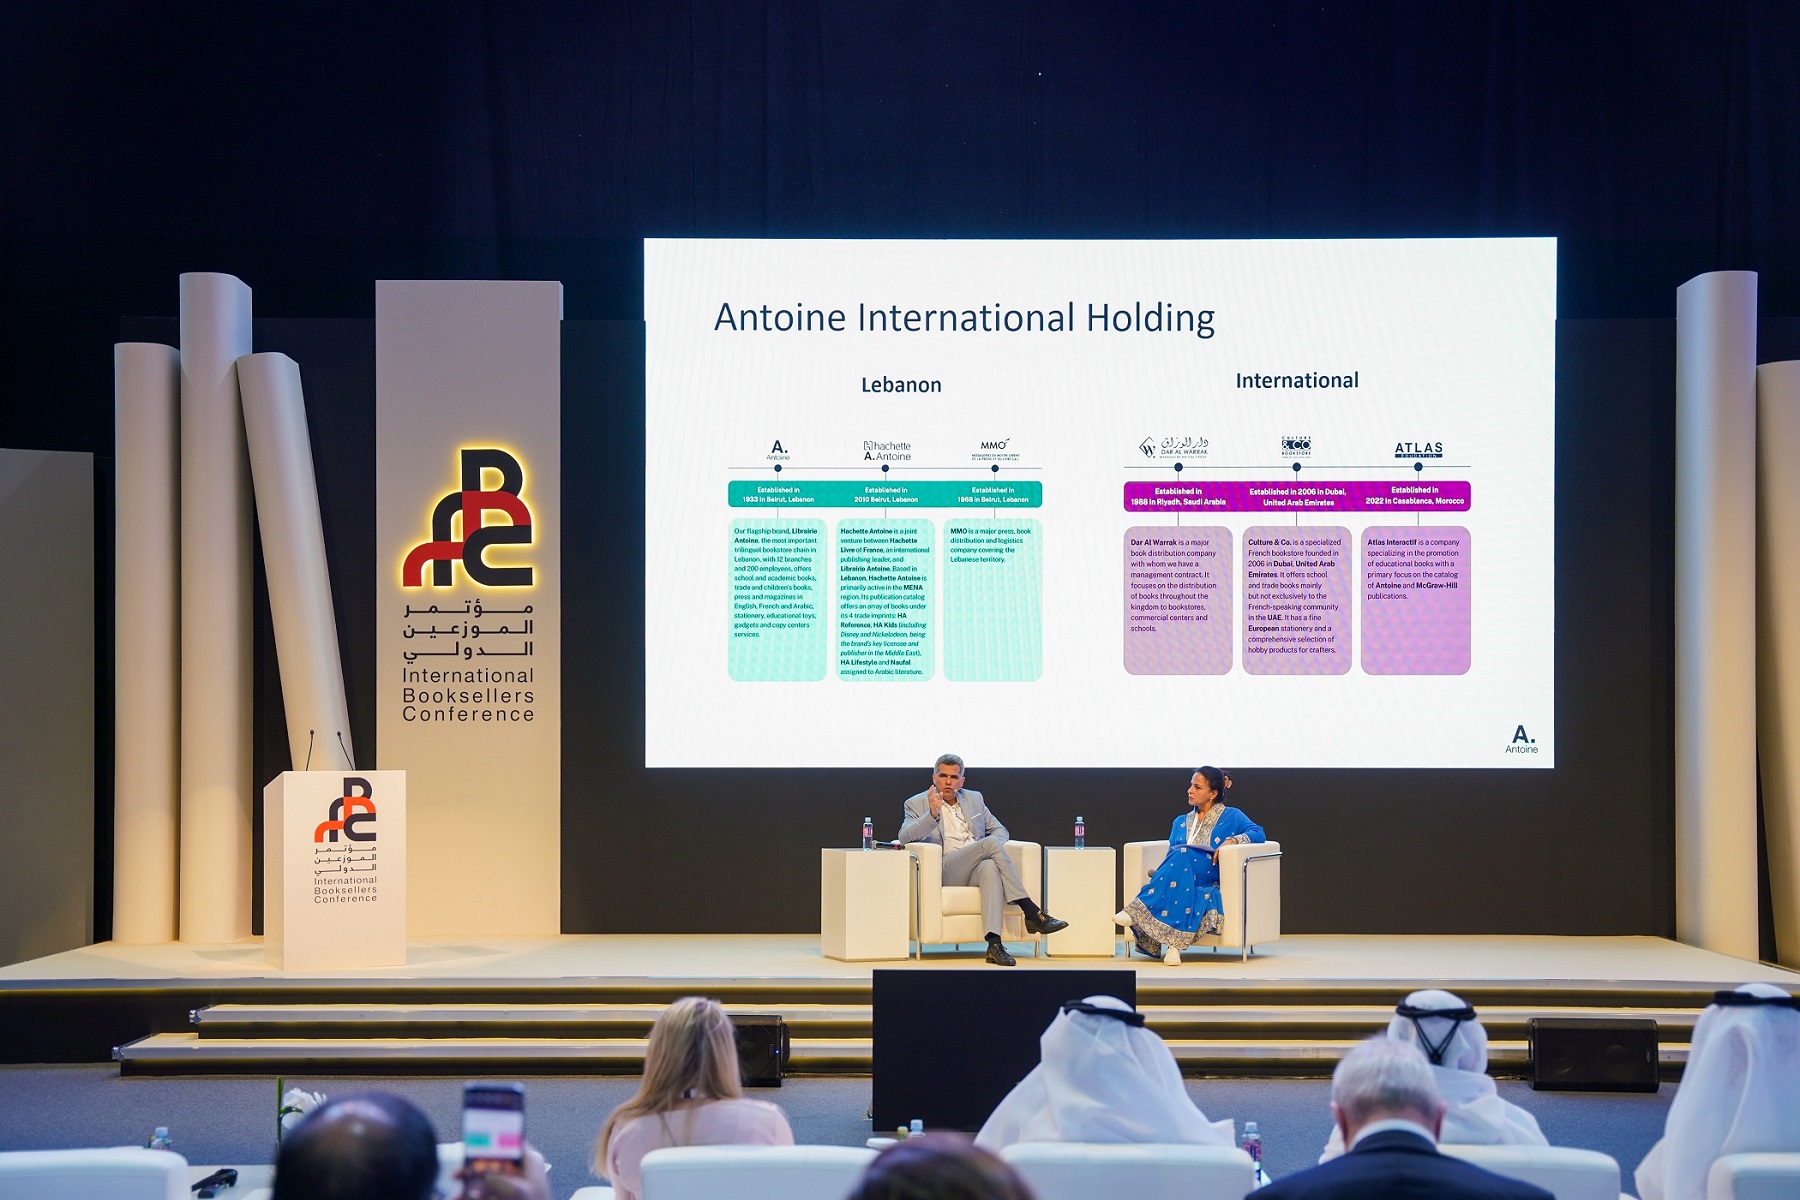 international booksellers conference concludes providing a roadmap for the industry welcoming 550+ global attendees